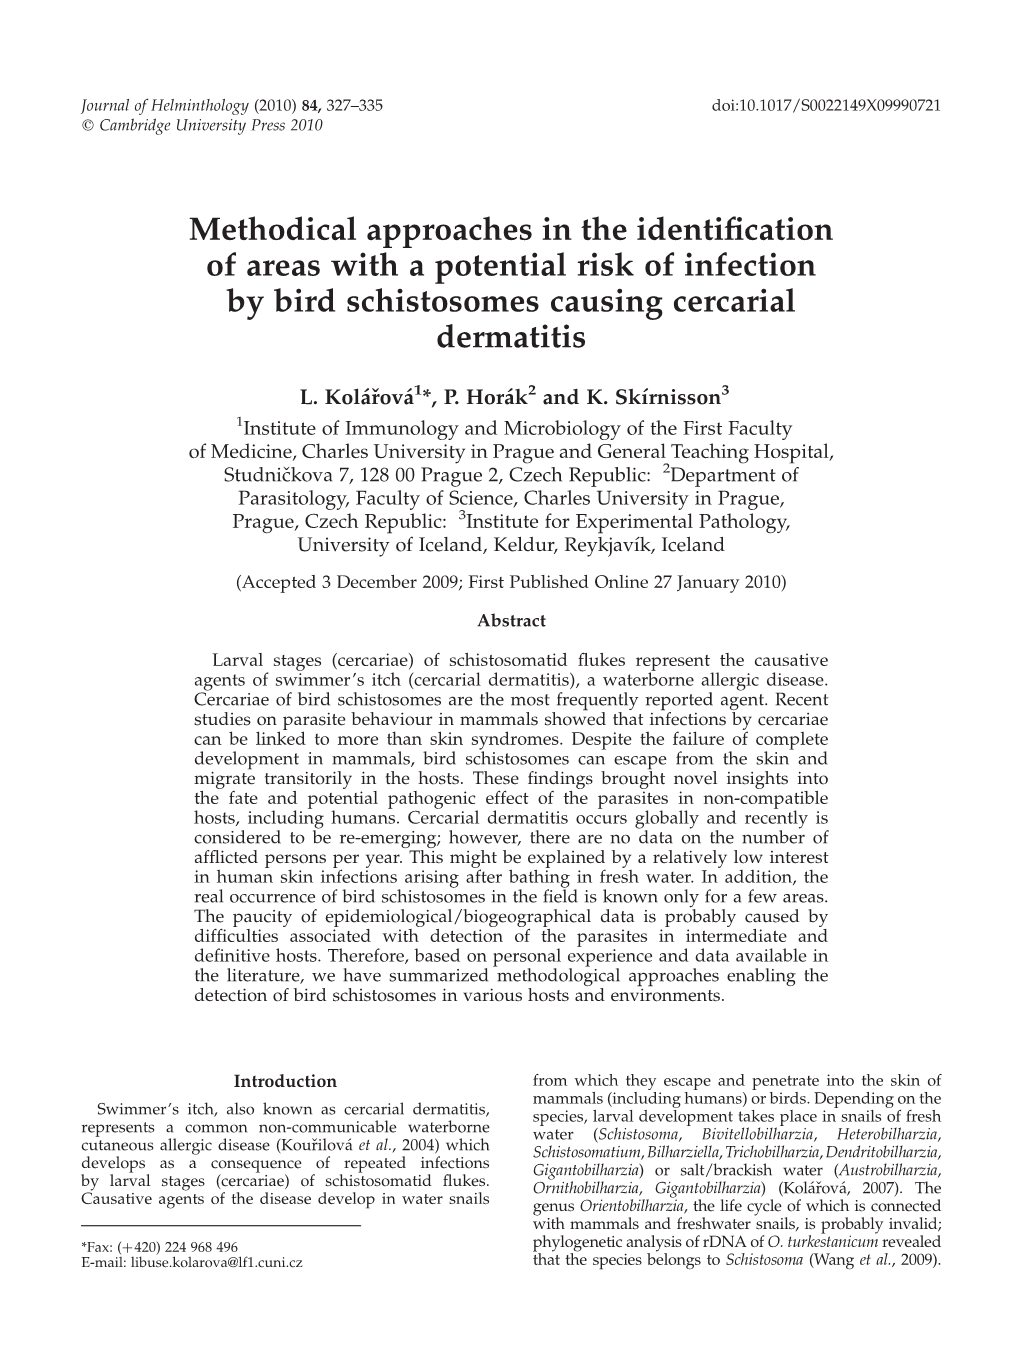 Methodical Approaches in the Identification of Areas With